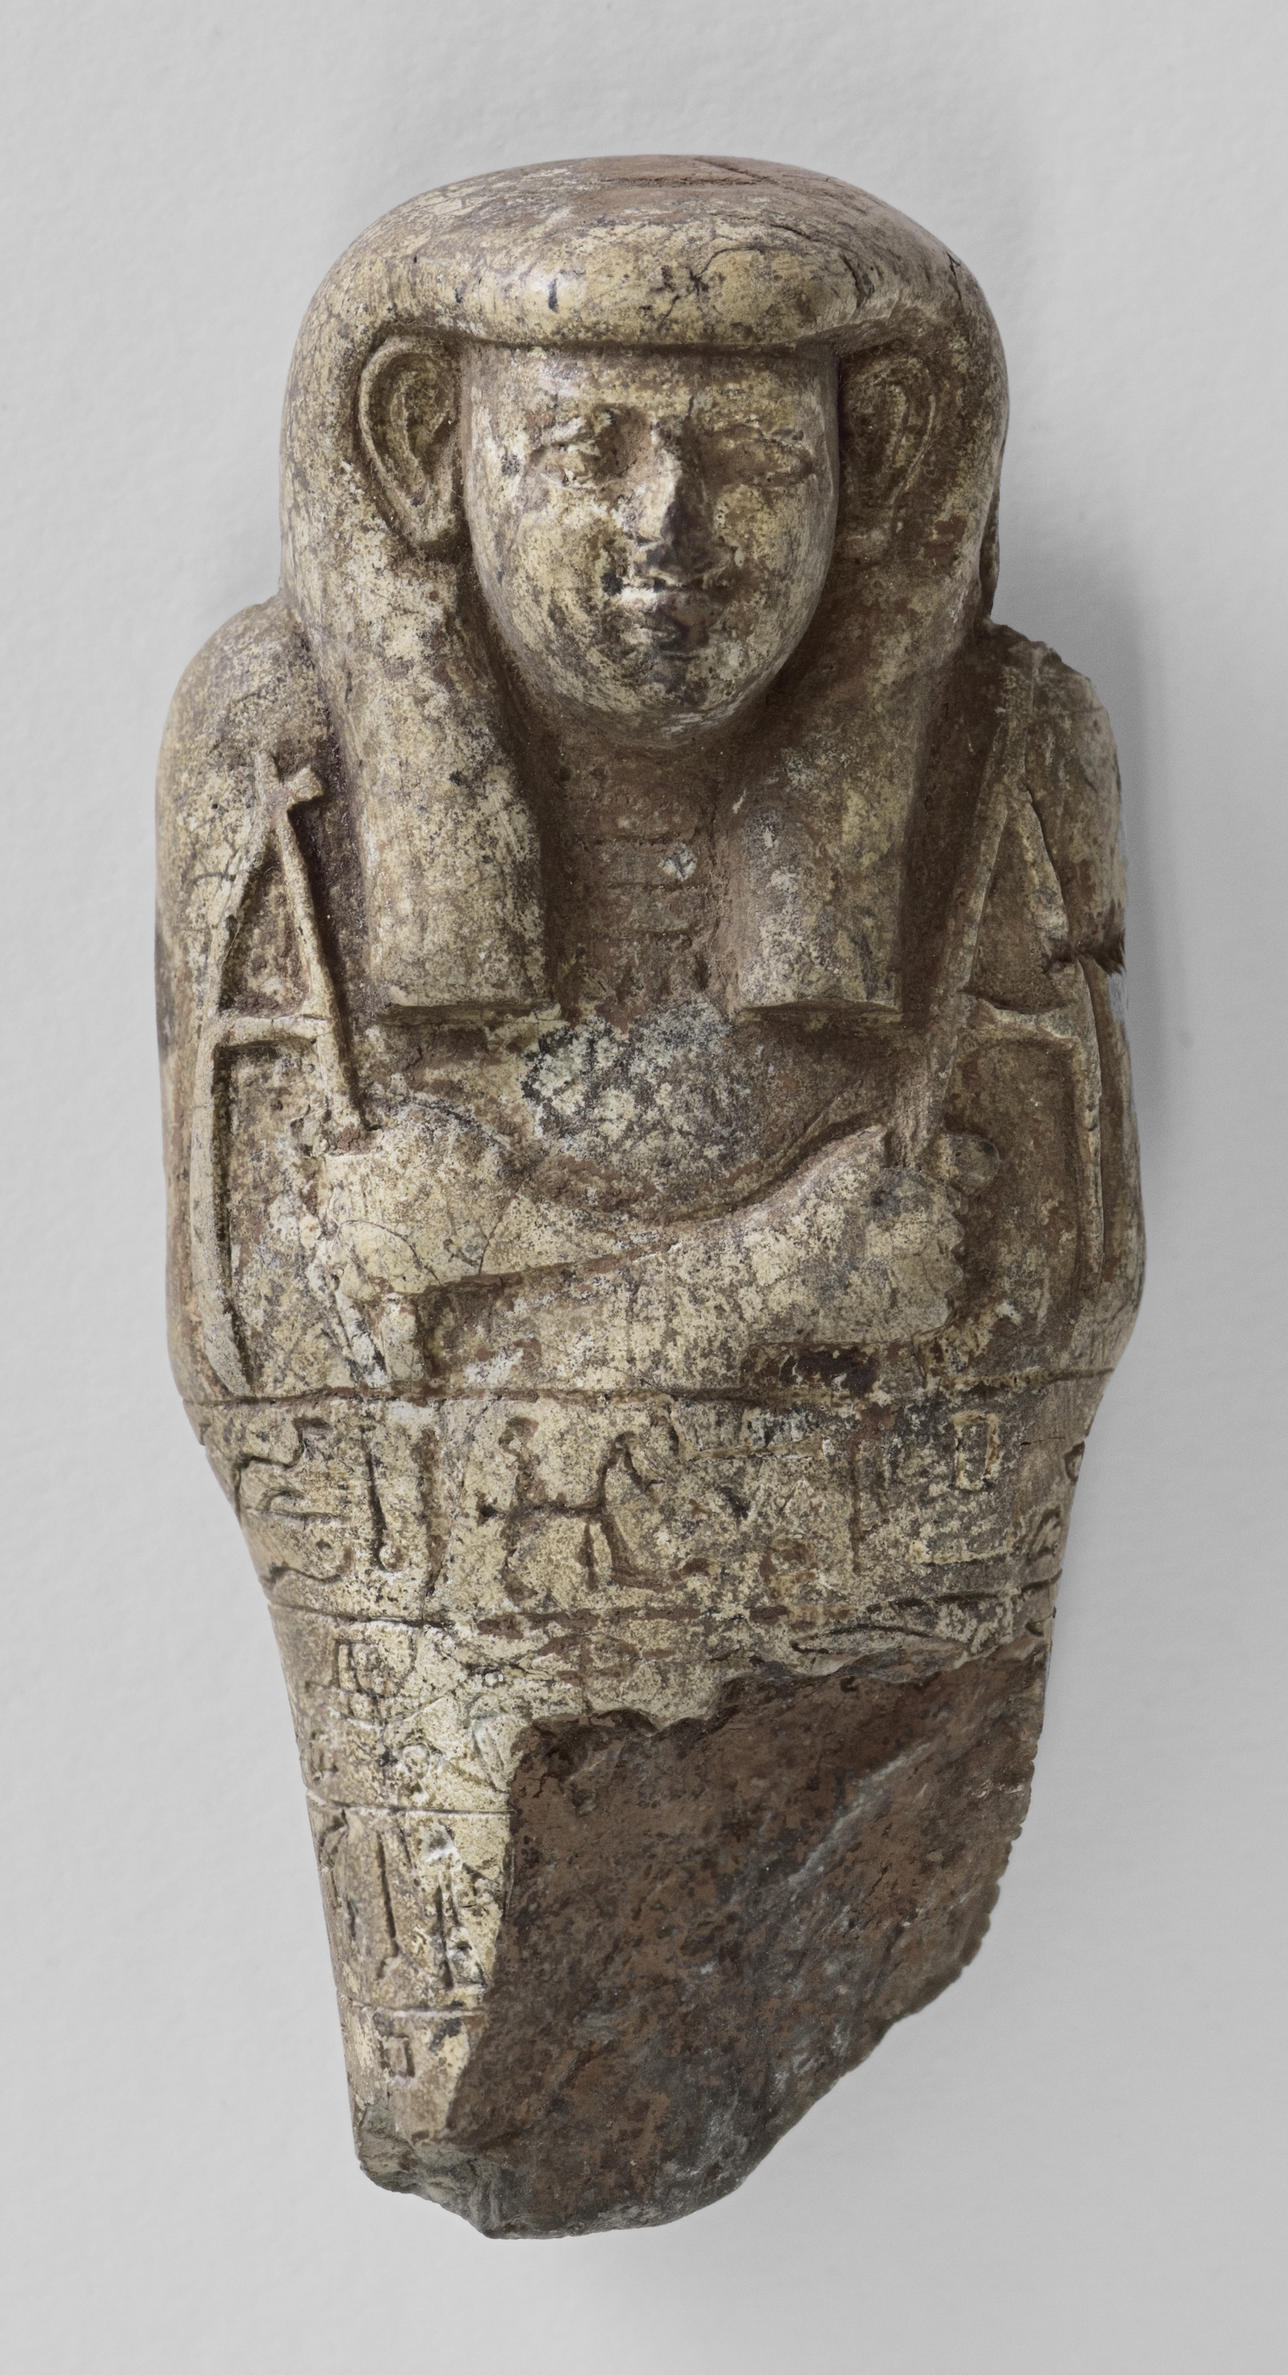 Top half of an Egyptian statuette fragment wearing a ceremonial headdress with arms crossed holding a slender object in each hand.